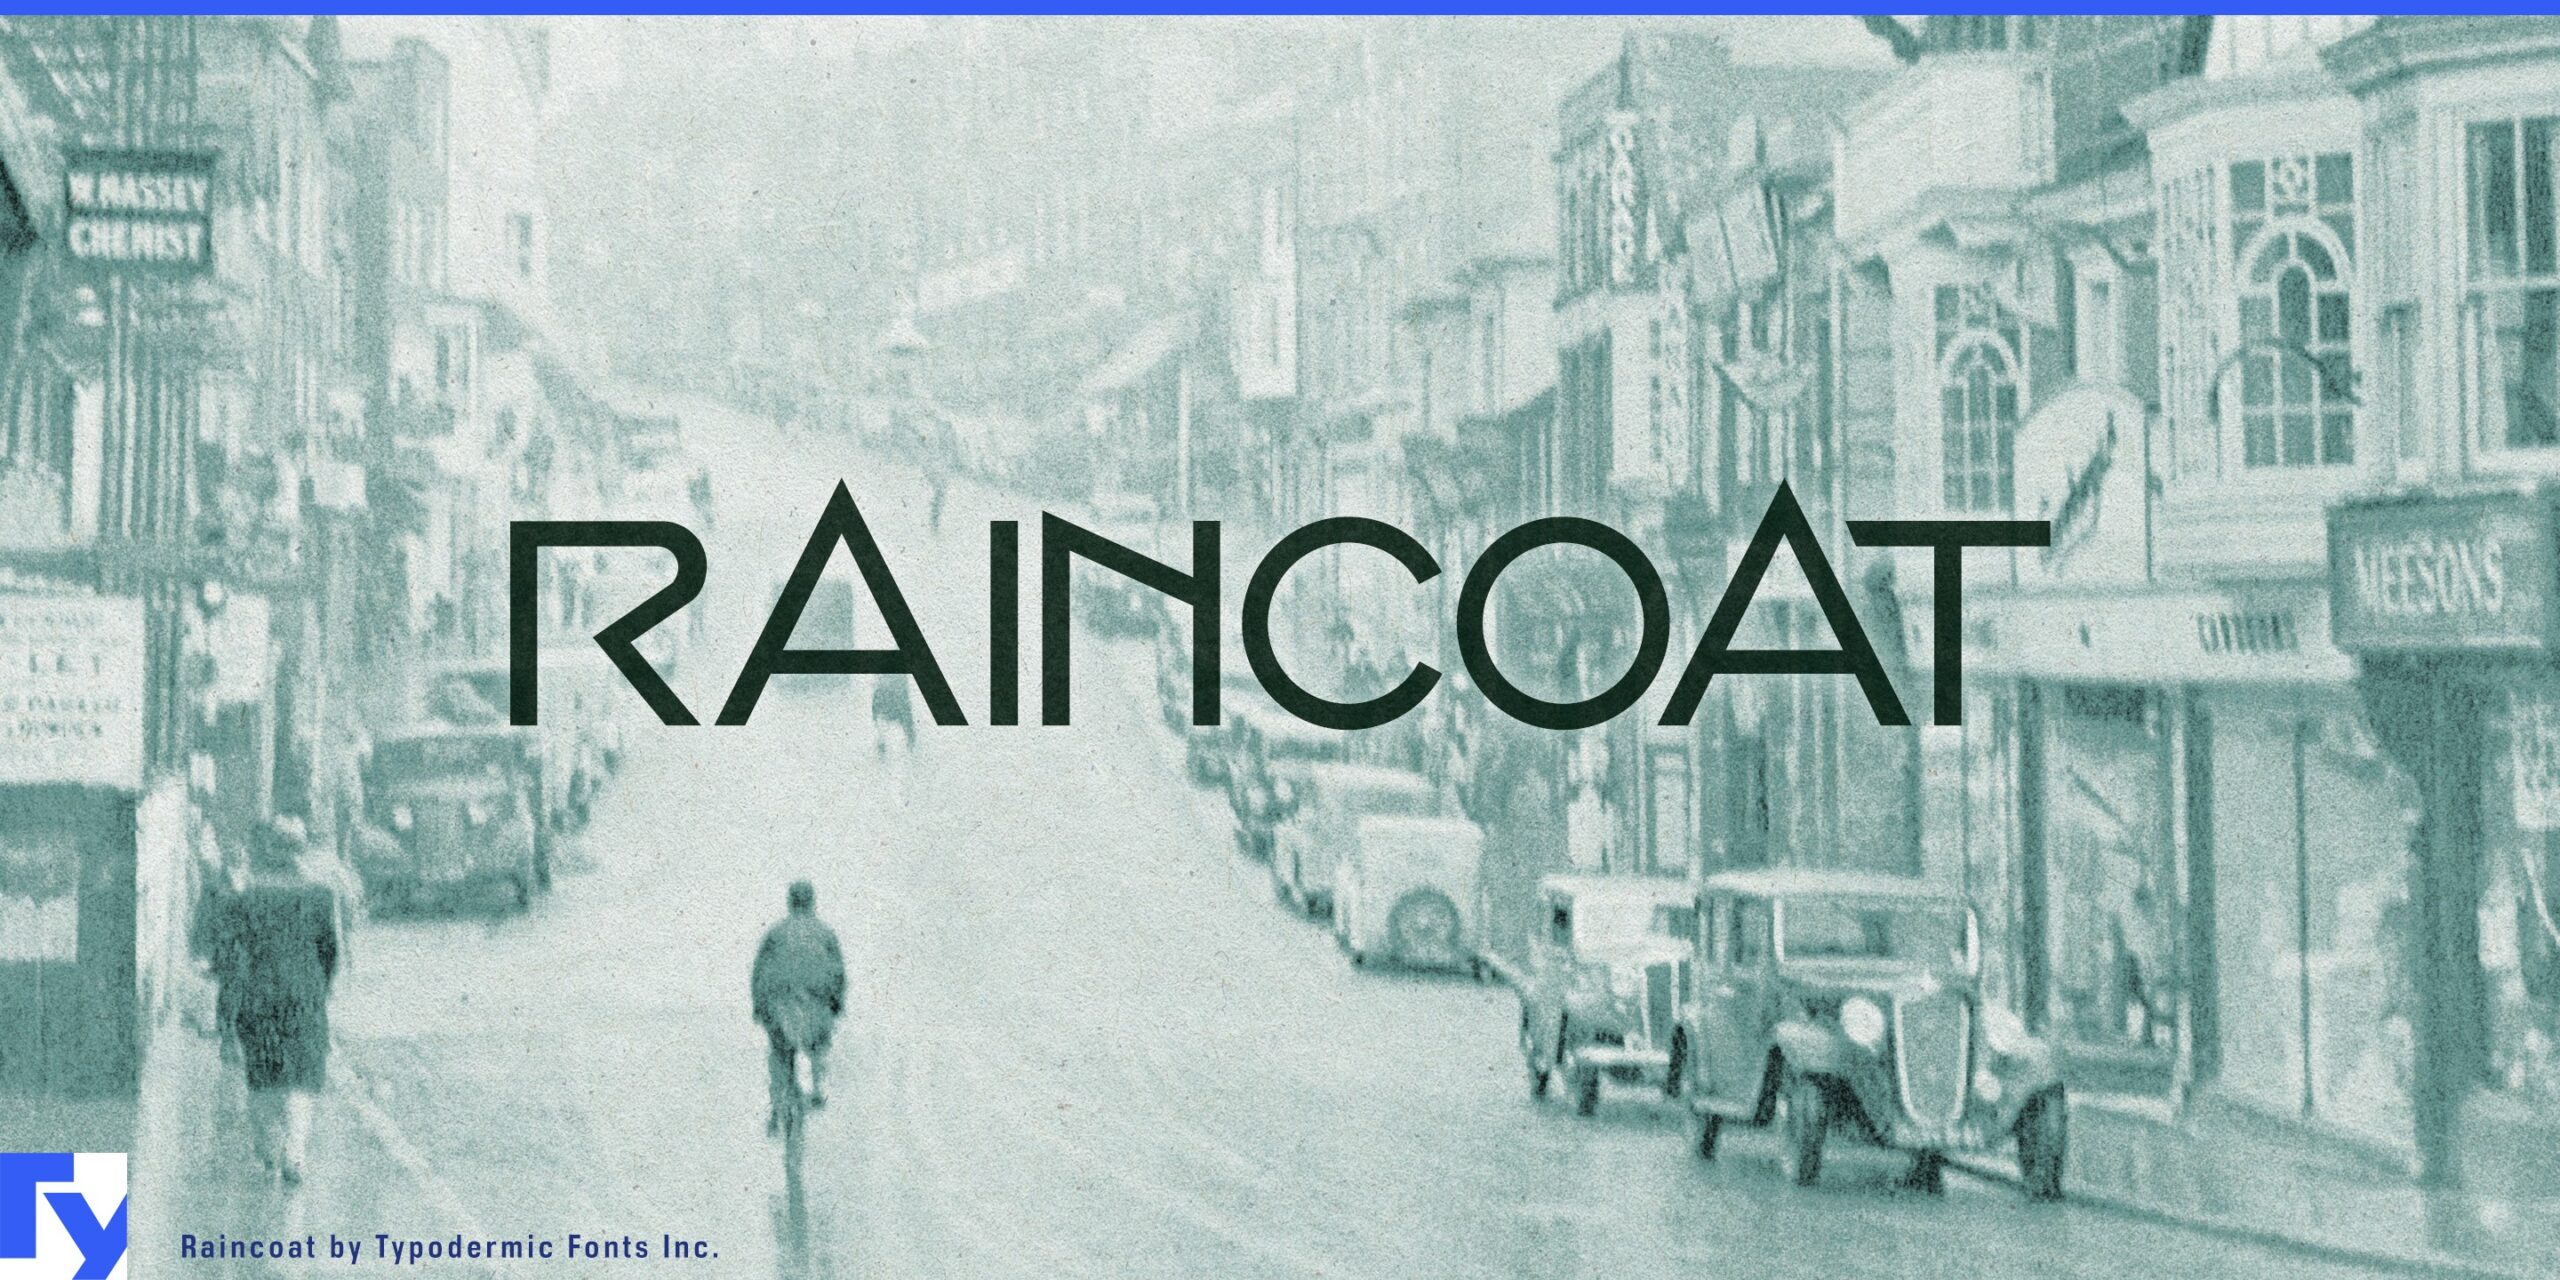 Embrace the timeless charm of Raincoat typeface